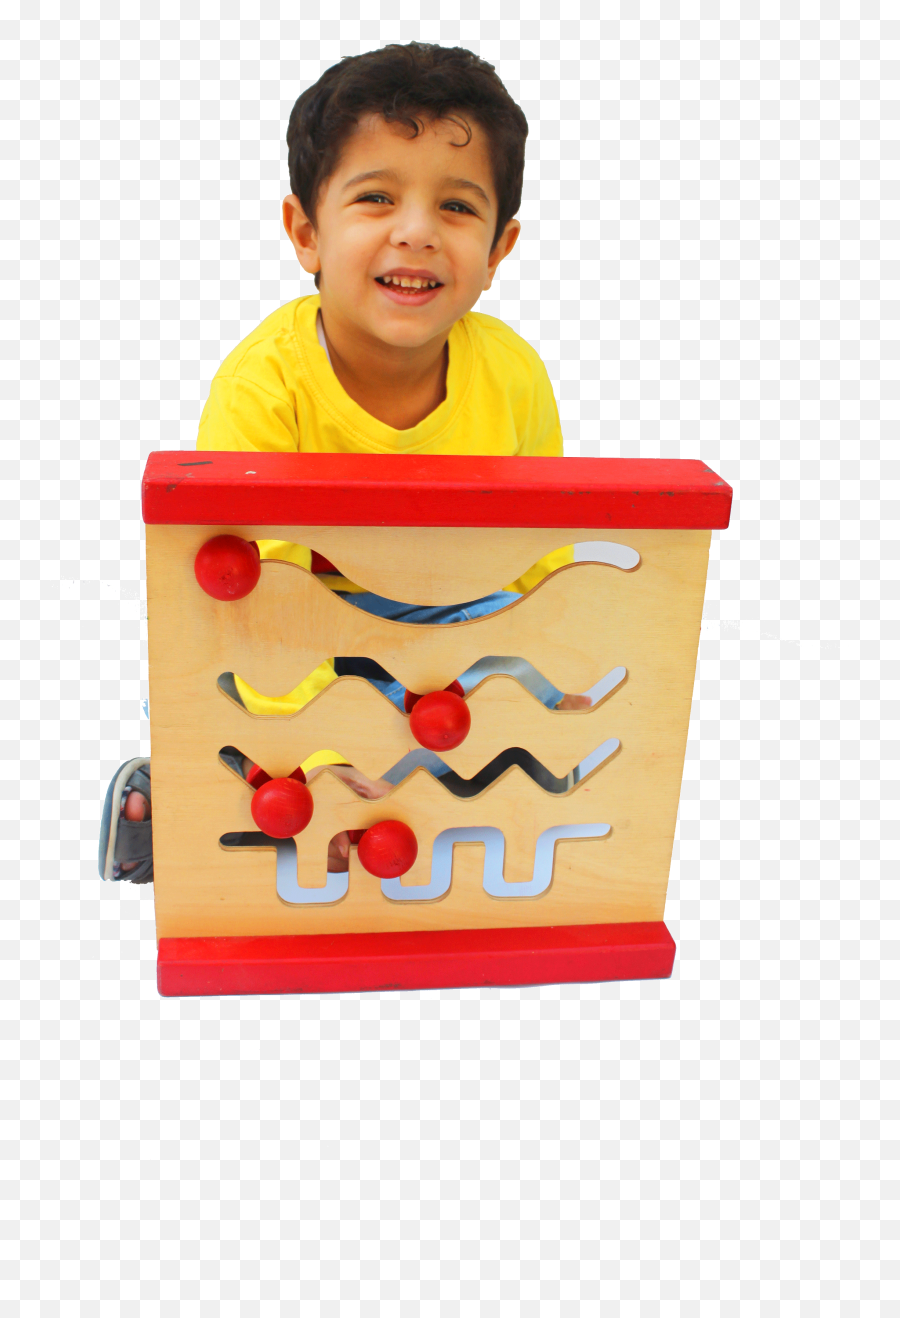 Play School Kids Png Images - Toddler 5417977 Vippng Boy,School Kids Png